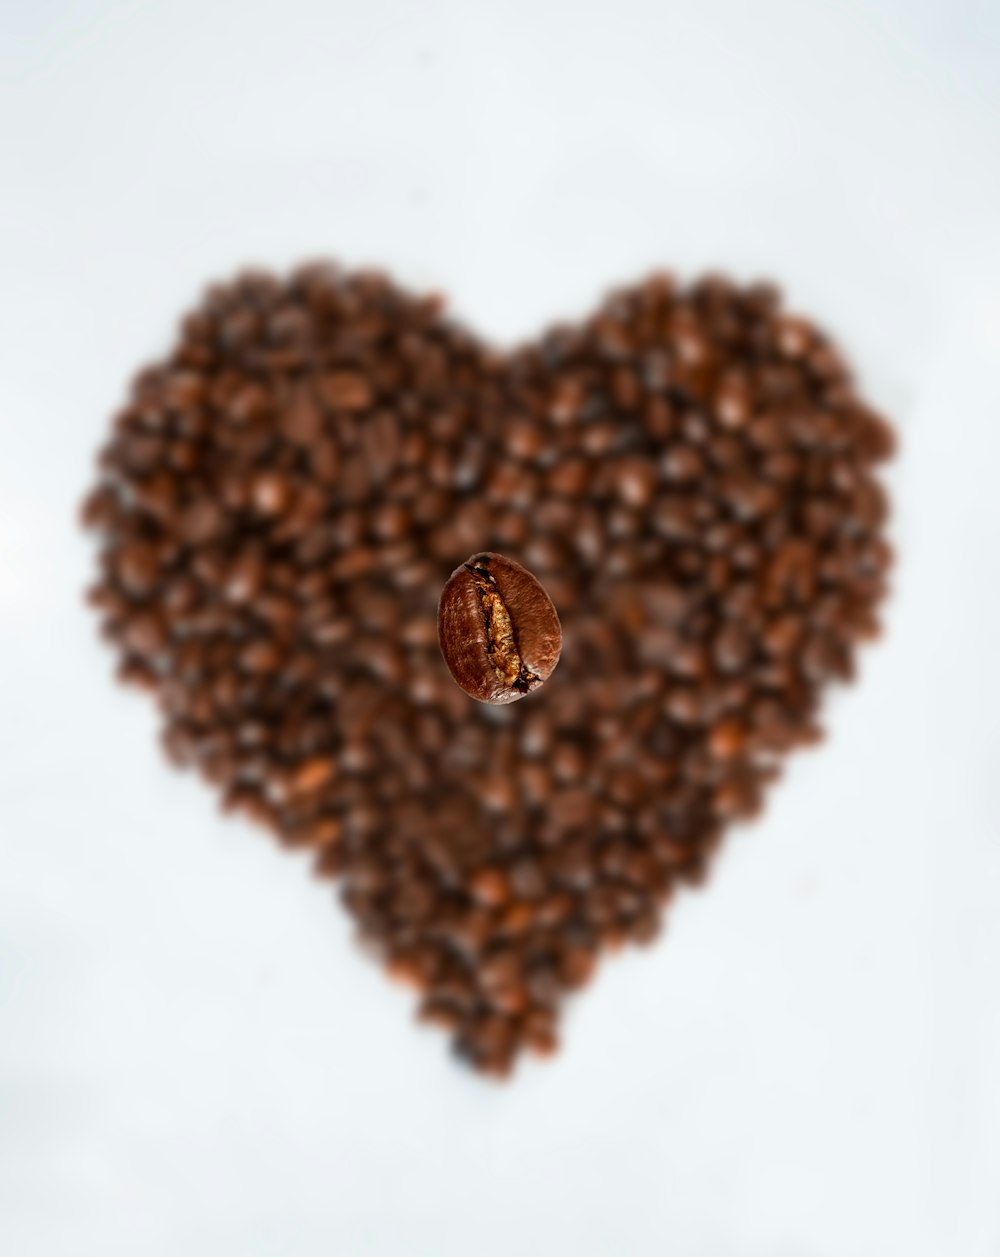 brown coffee beans on white surface